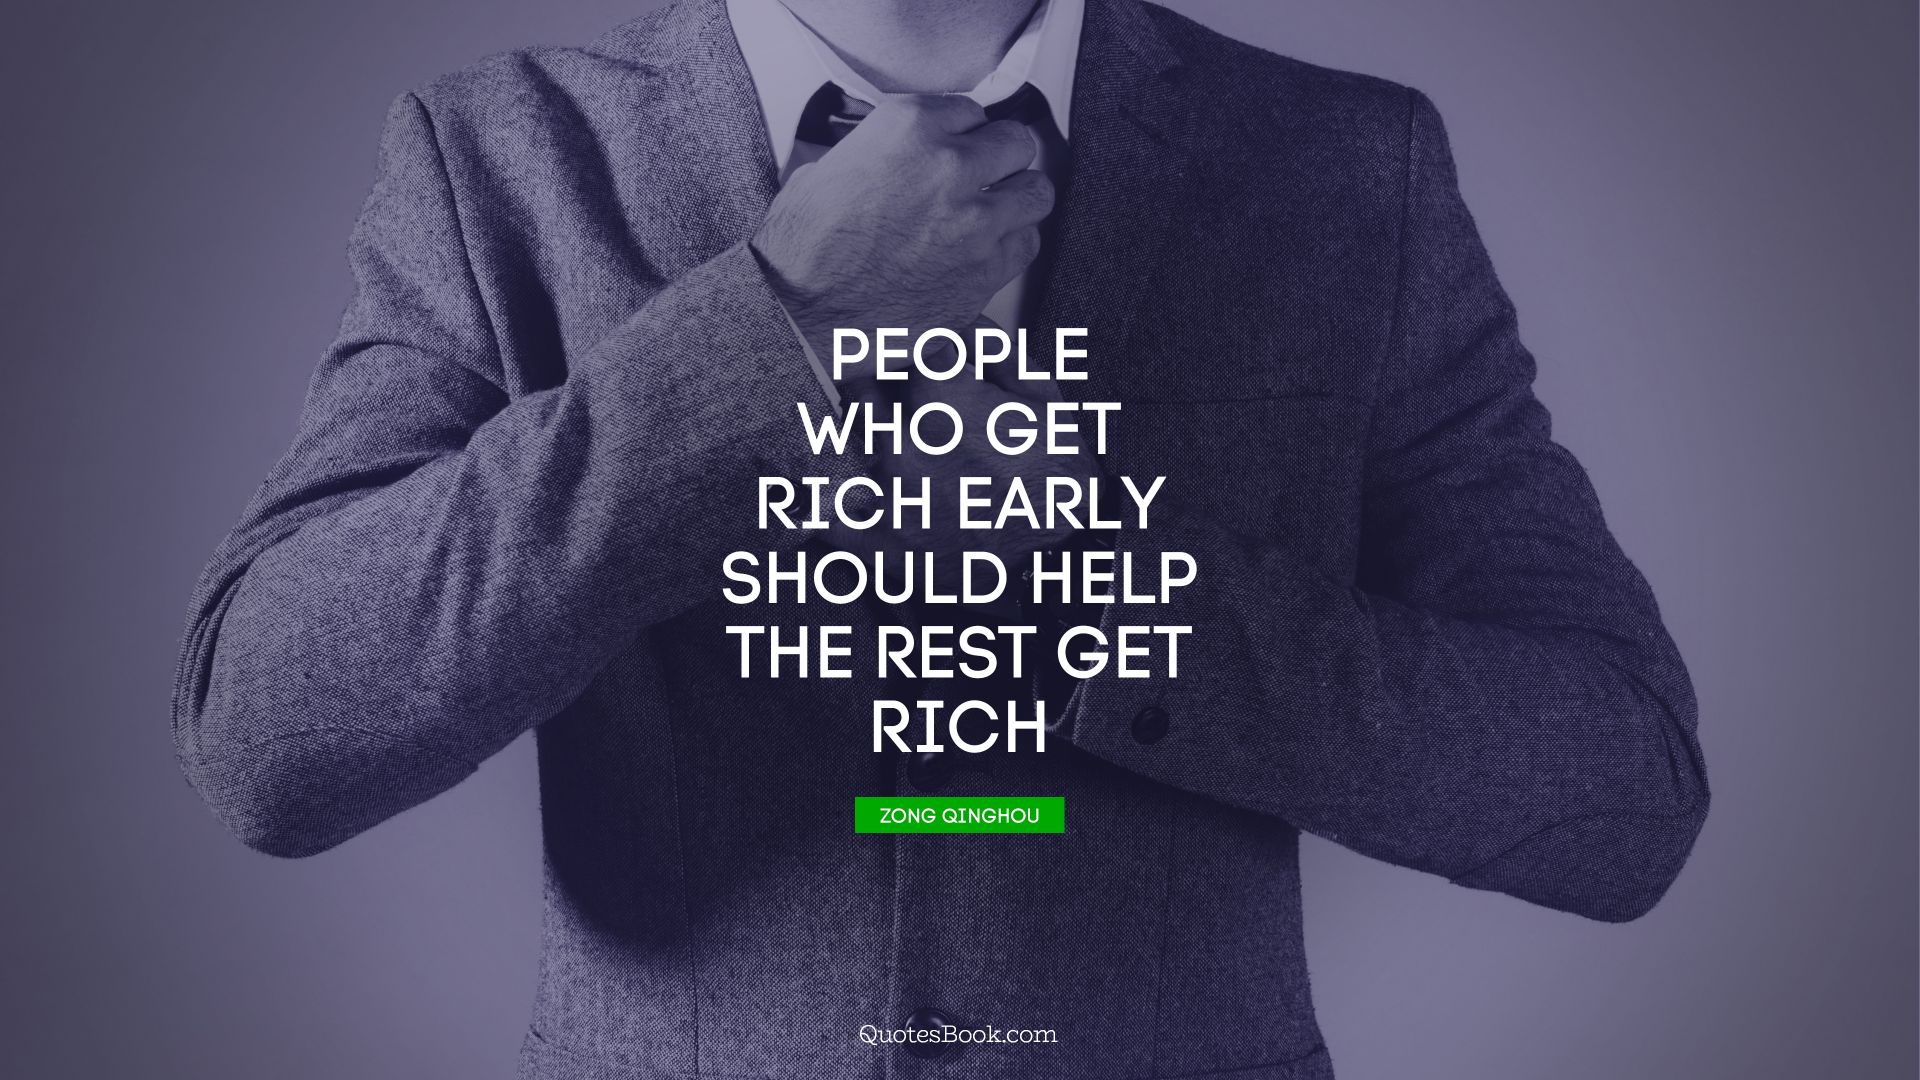 People who get rich early should help the rest get rich. - Quote by Zong Qinghou